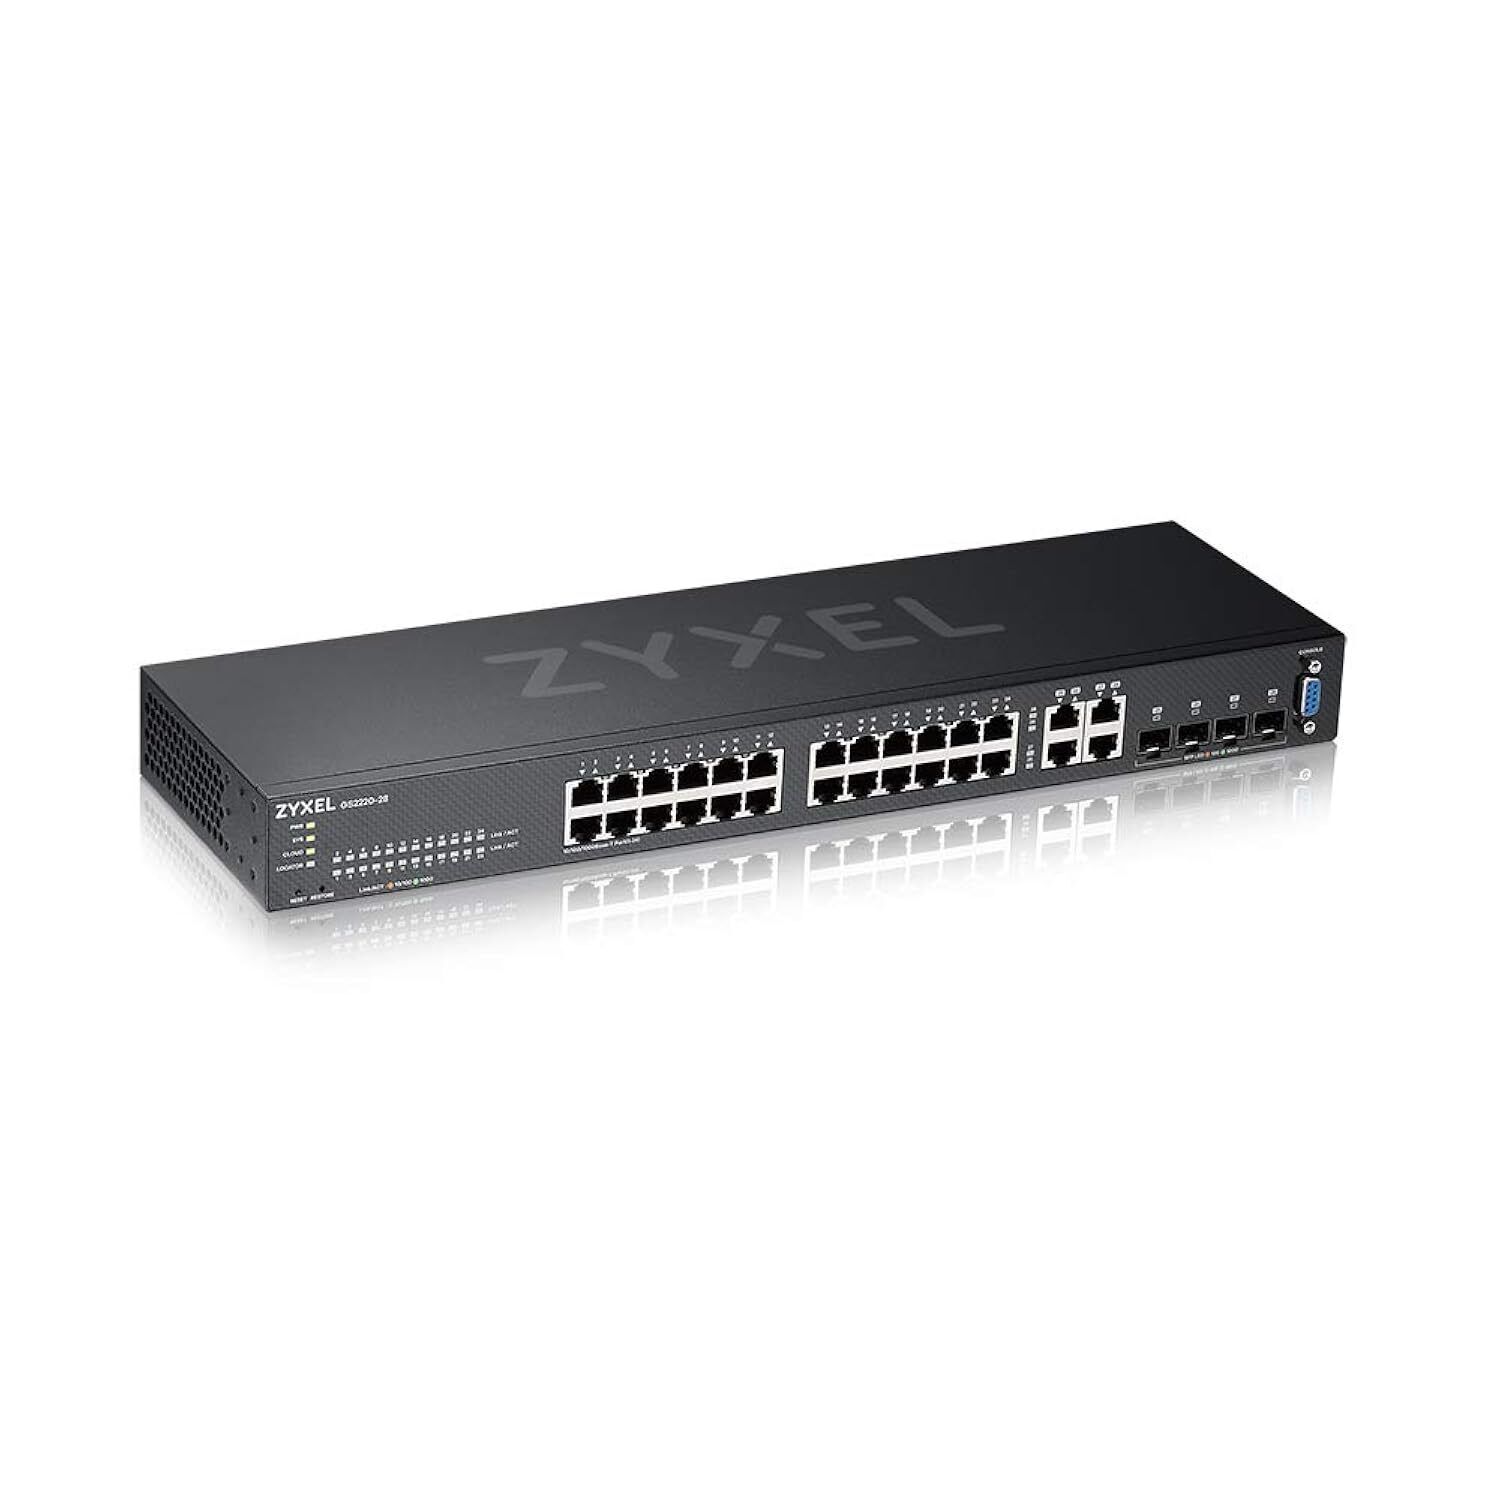 Zyxel 24-Port Gigabit Ethernet Layer 2 Managed Switch - Fanless Design with 4